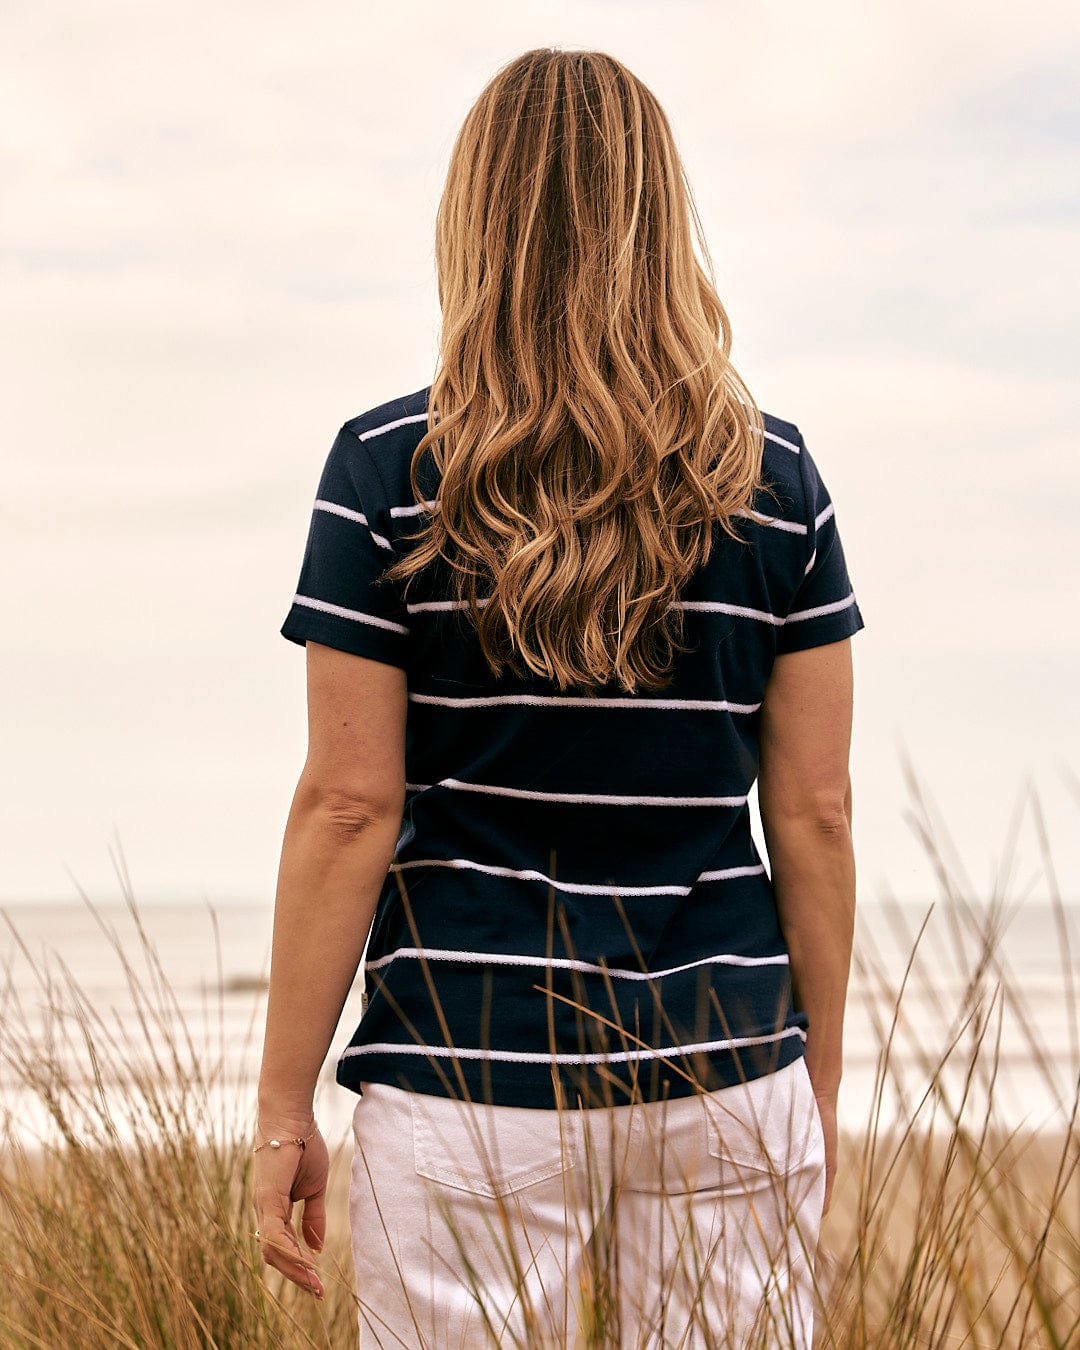 The Saltrock - Womens Striped Short Sleeve T-Shirt - Blue worn by a woman looking at the ocean.